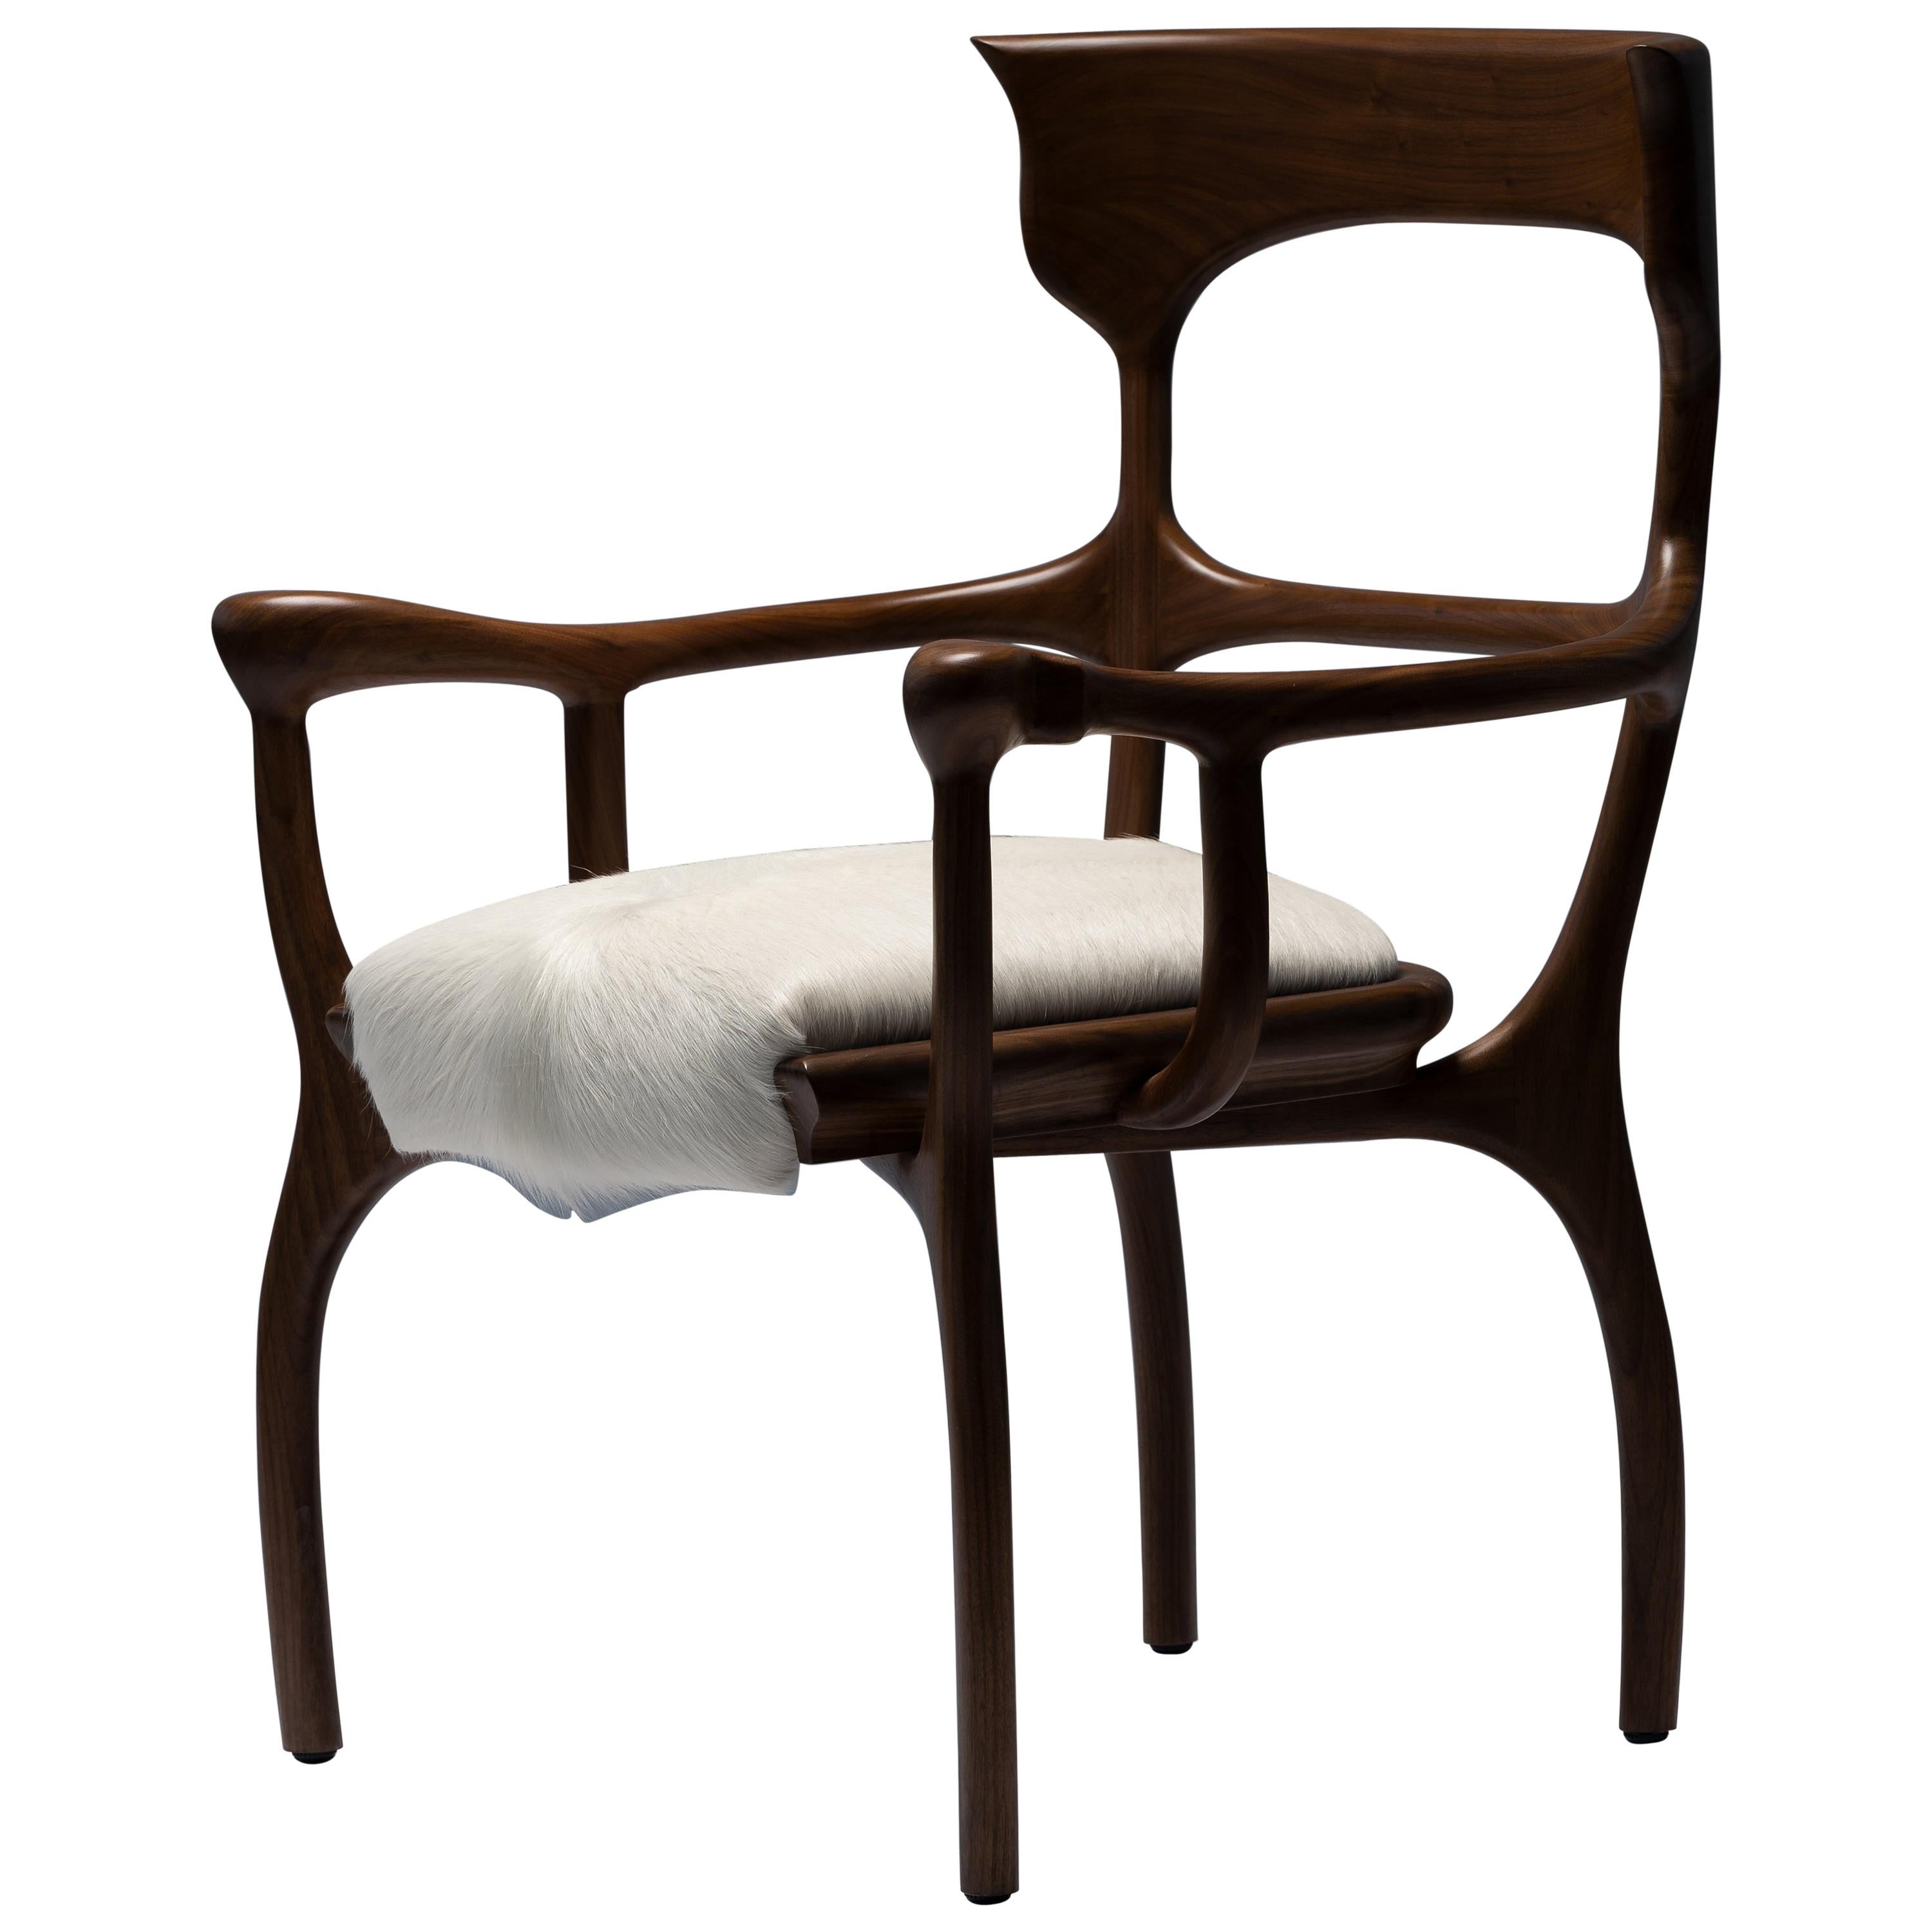 MARTA Brown Chair/Armchair in Walnut/Oak with Cream Cowhide Seat by Mandy Graham